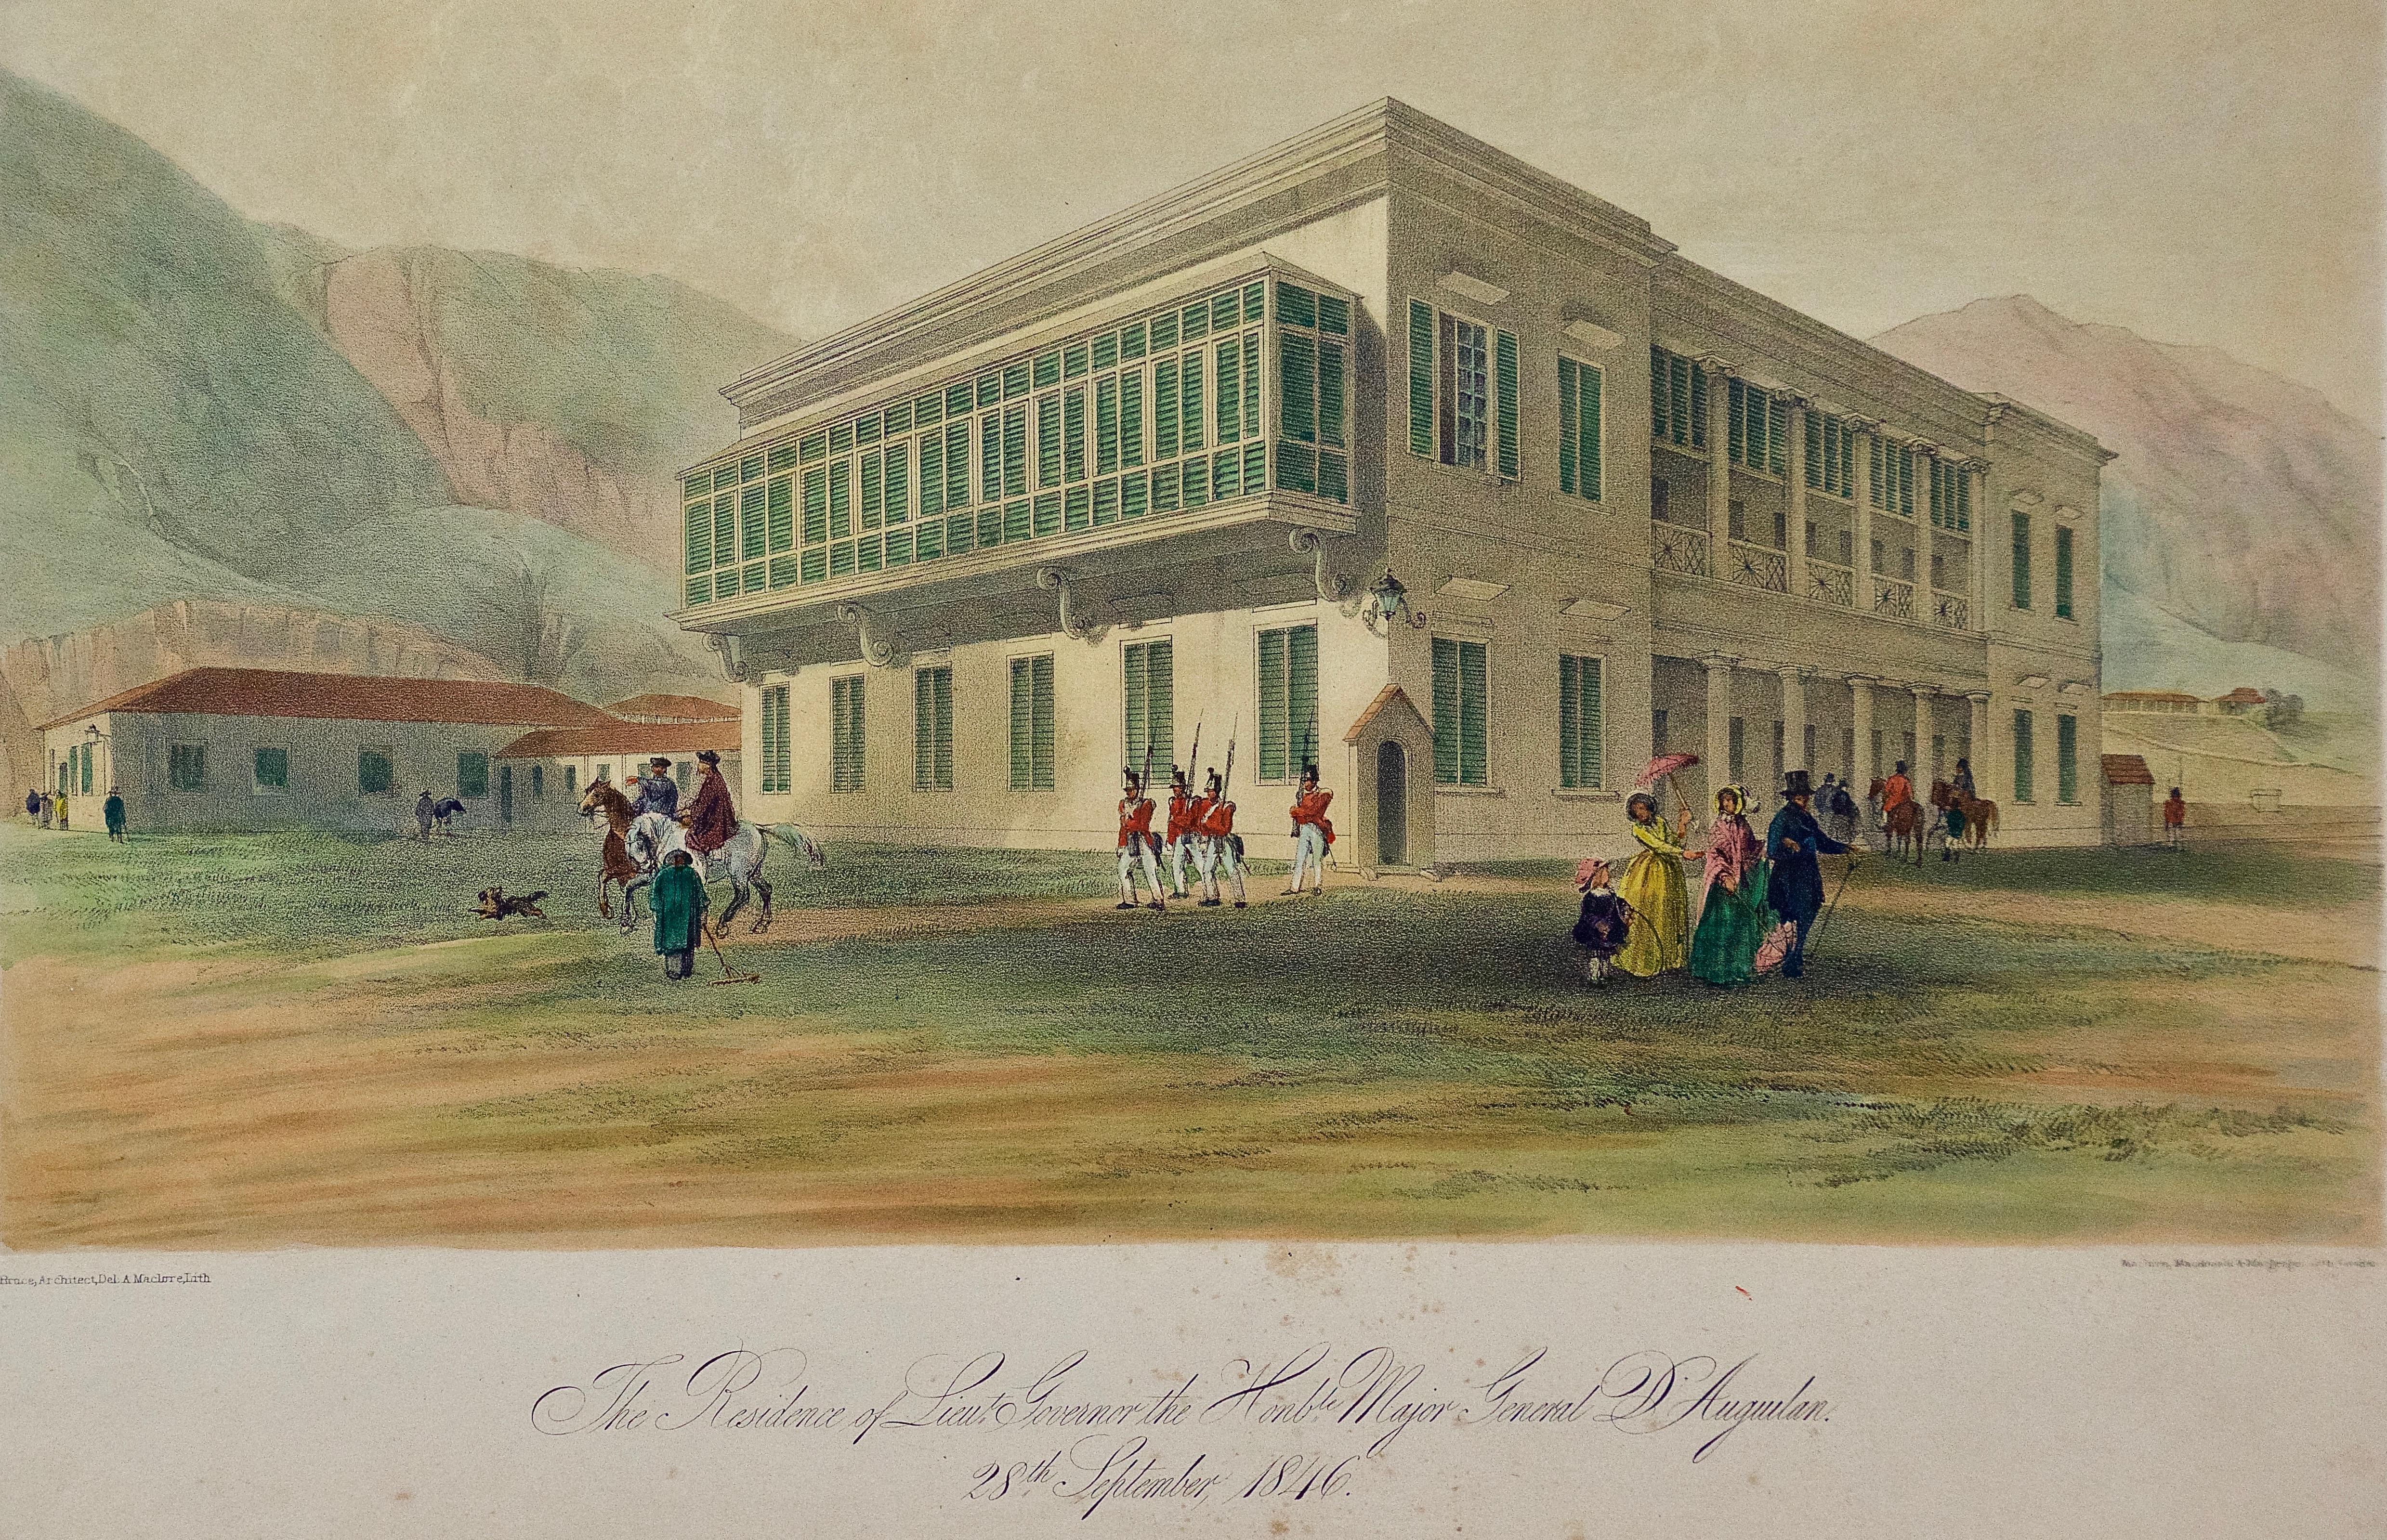 Architectural View of the Residence of the Lieutenant Governor, Hong Kong - Print by Murdoch Bruce